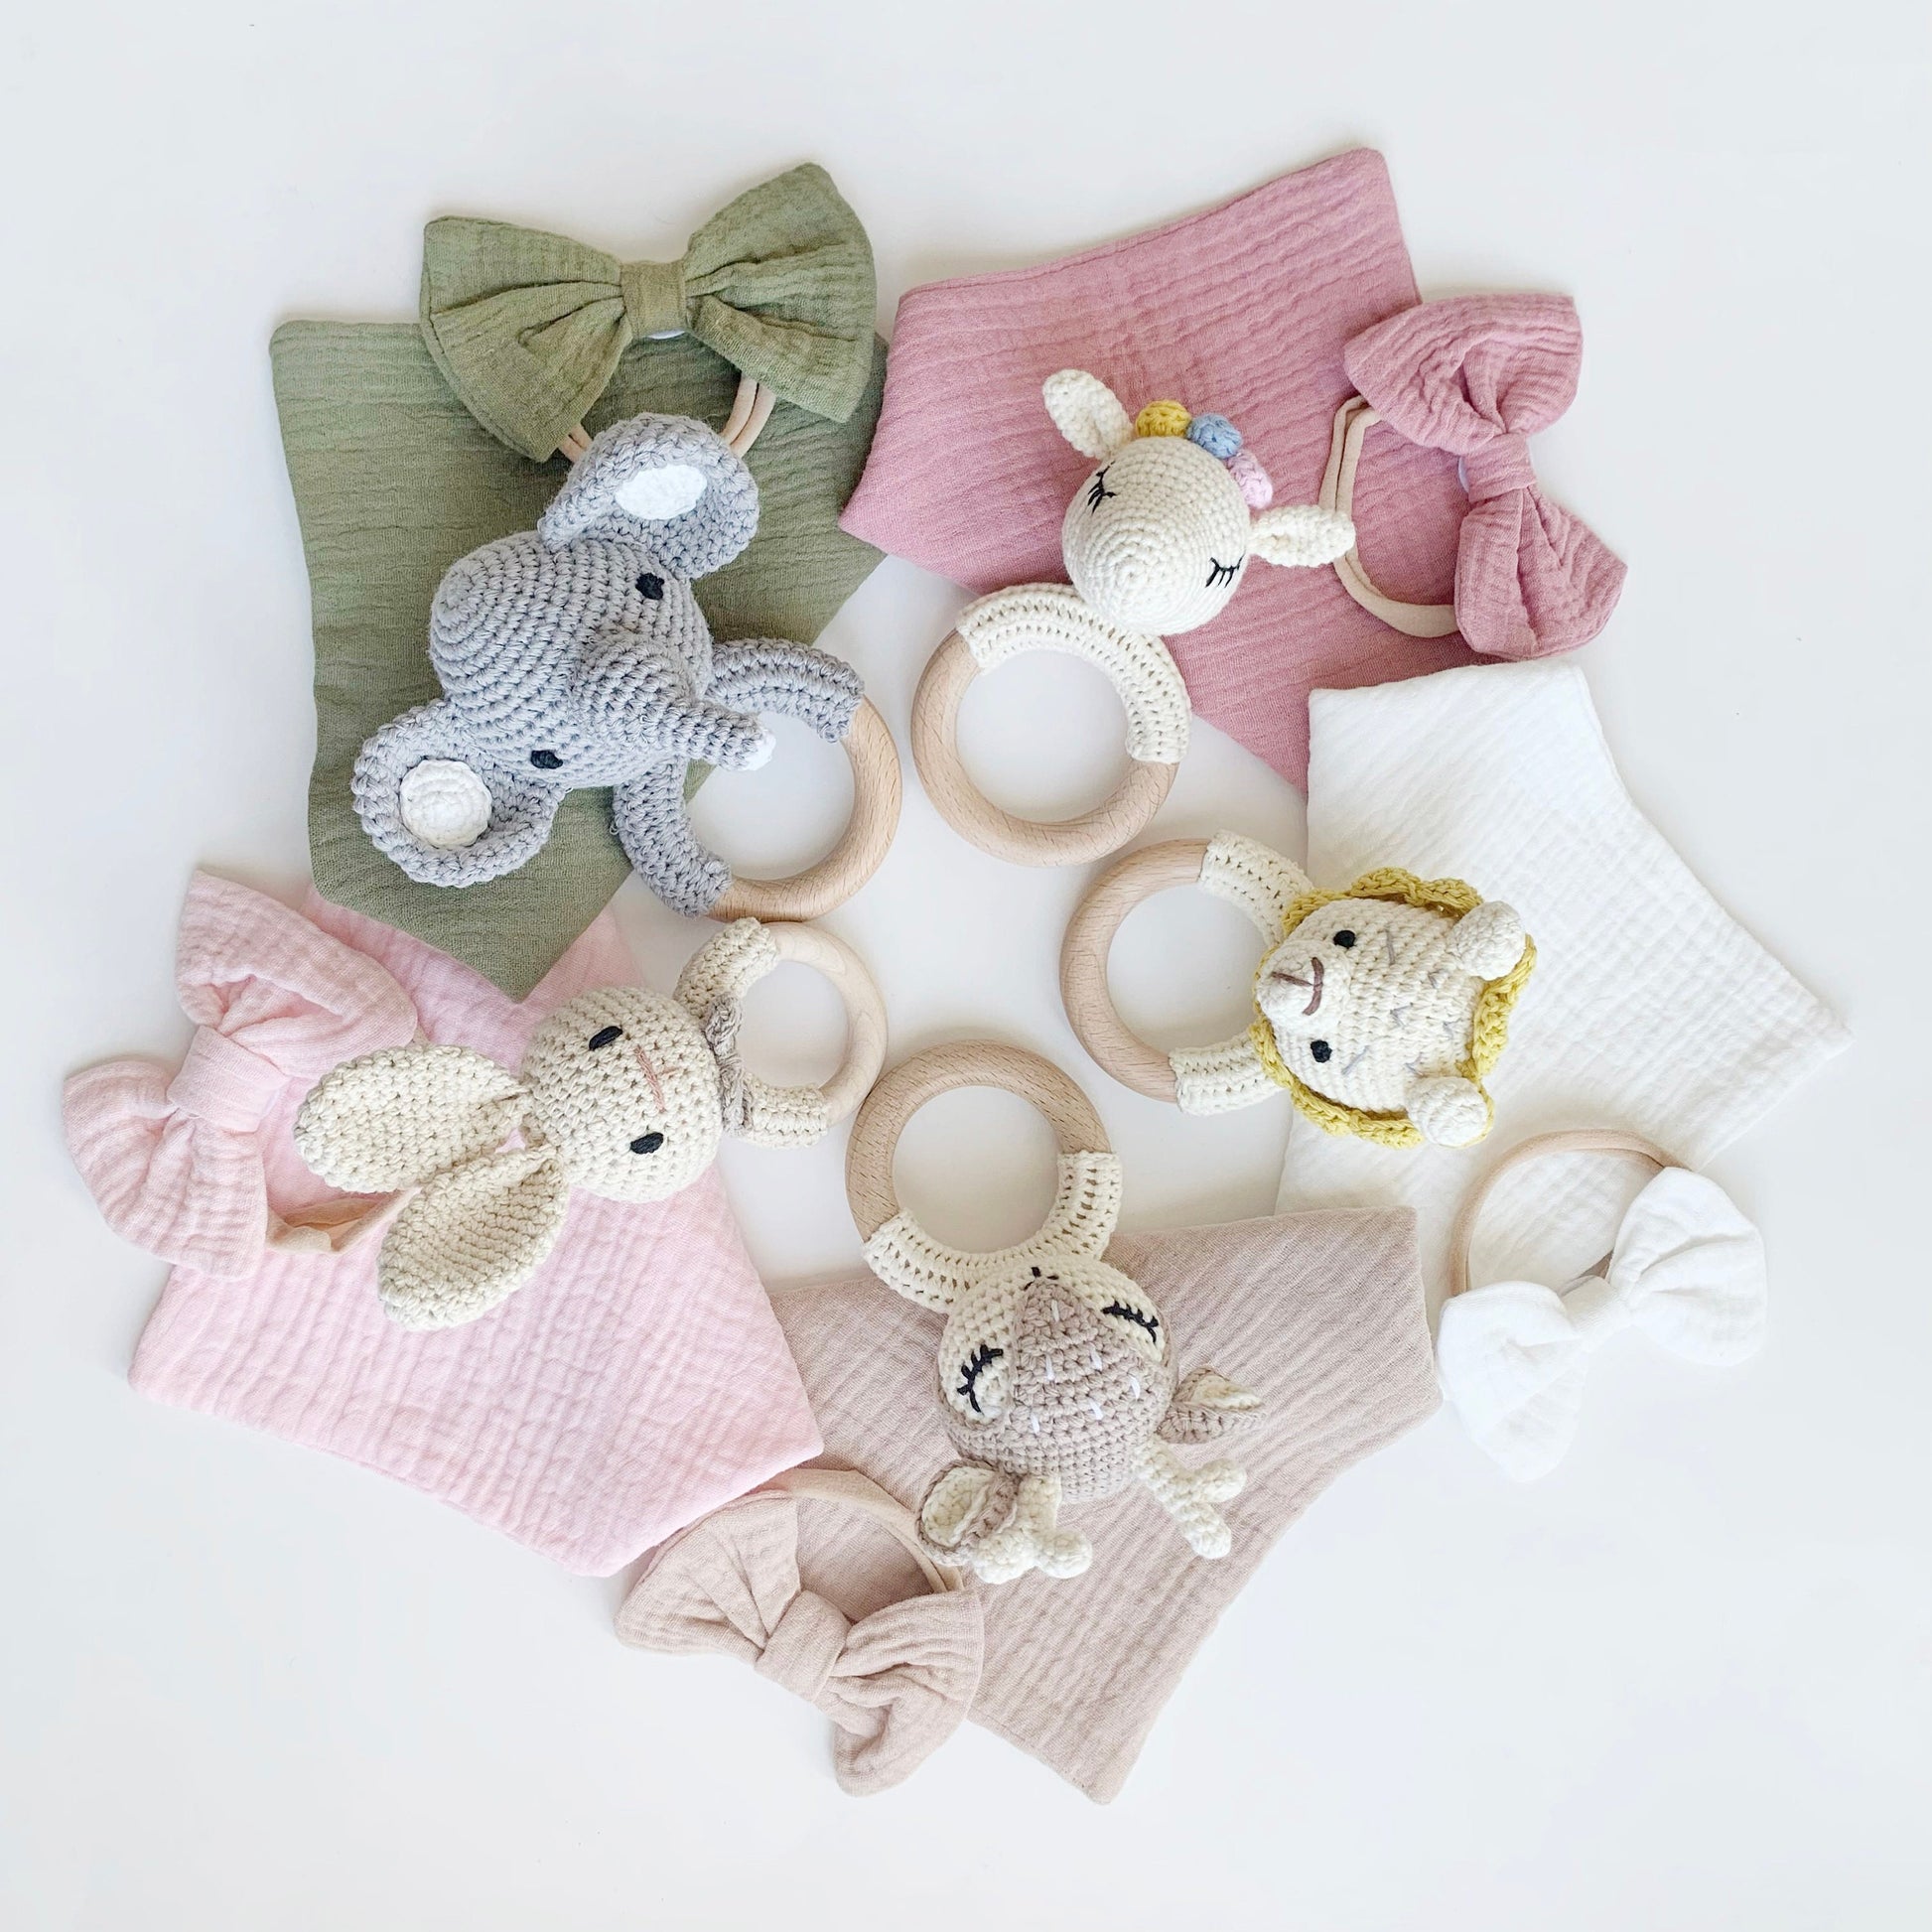 DIY Baby Shower Gifts for Girls: With Free Patterns!! - My Golden Thimble